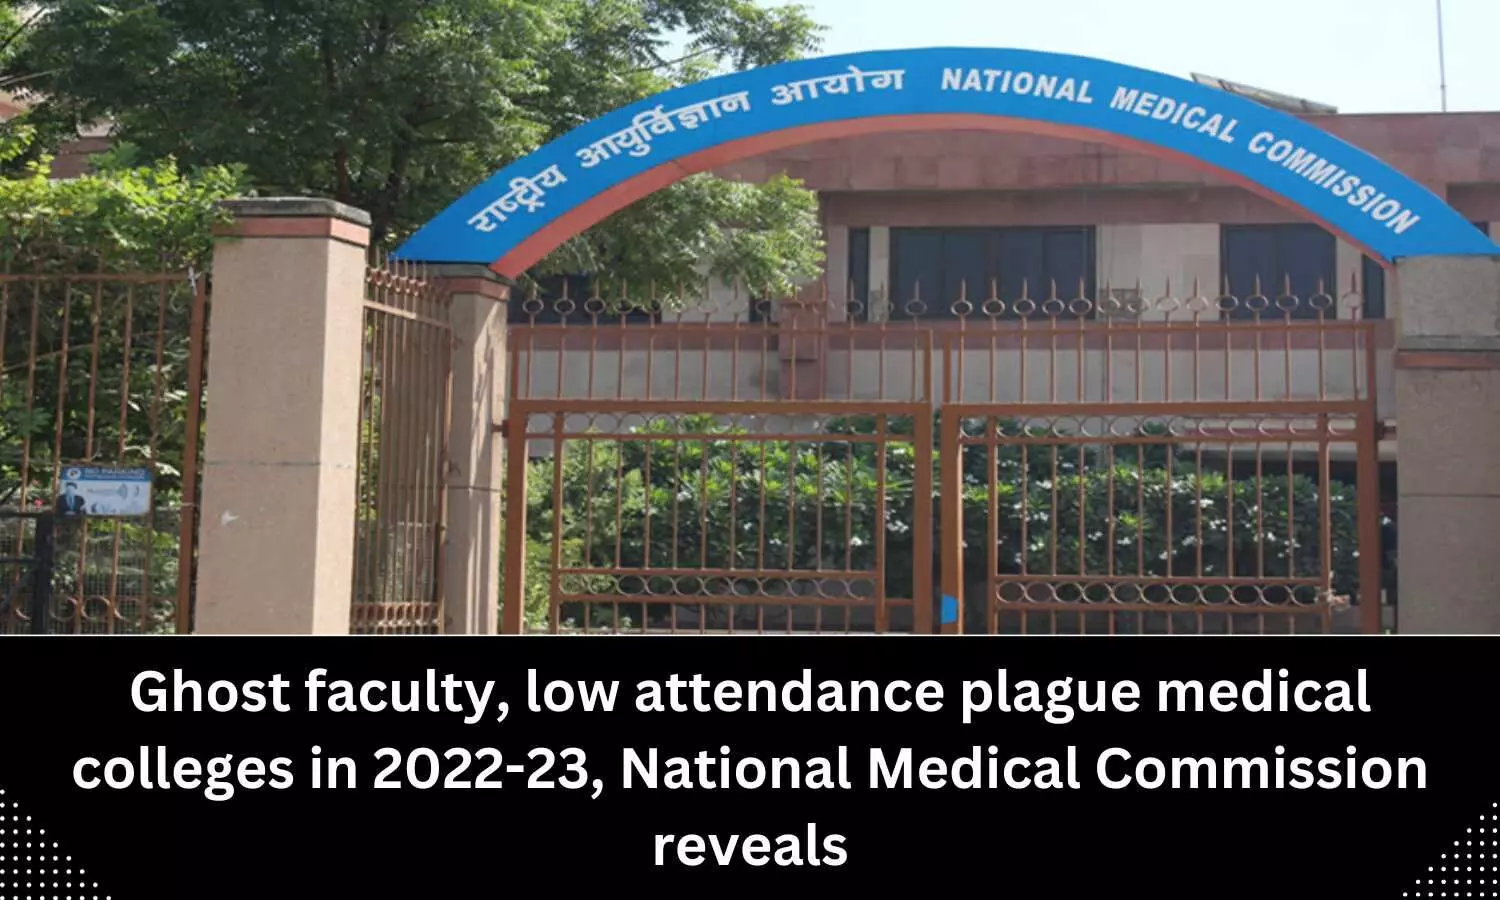 Majority of medical colleges have ghost faculty, fall short of 50 per cent attendance requirement: NMC